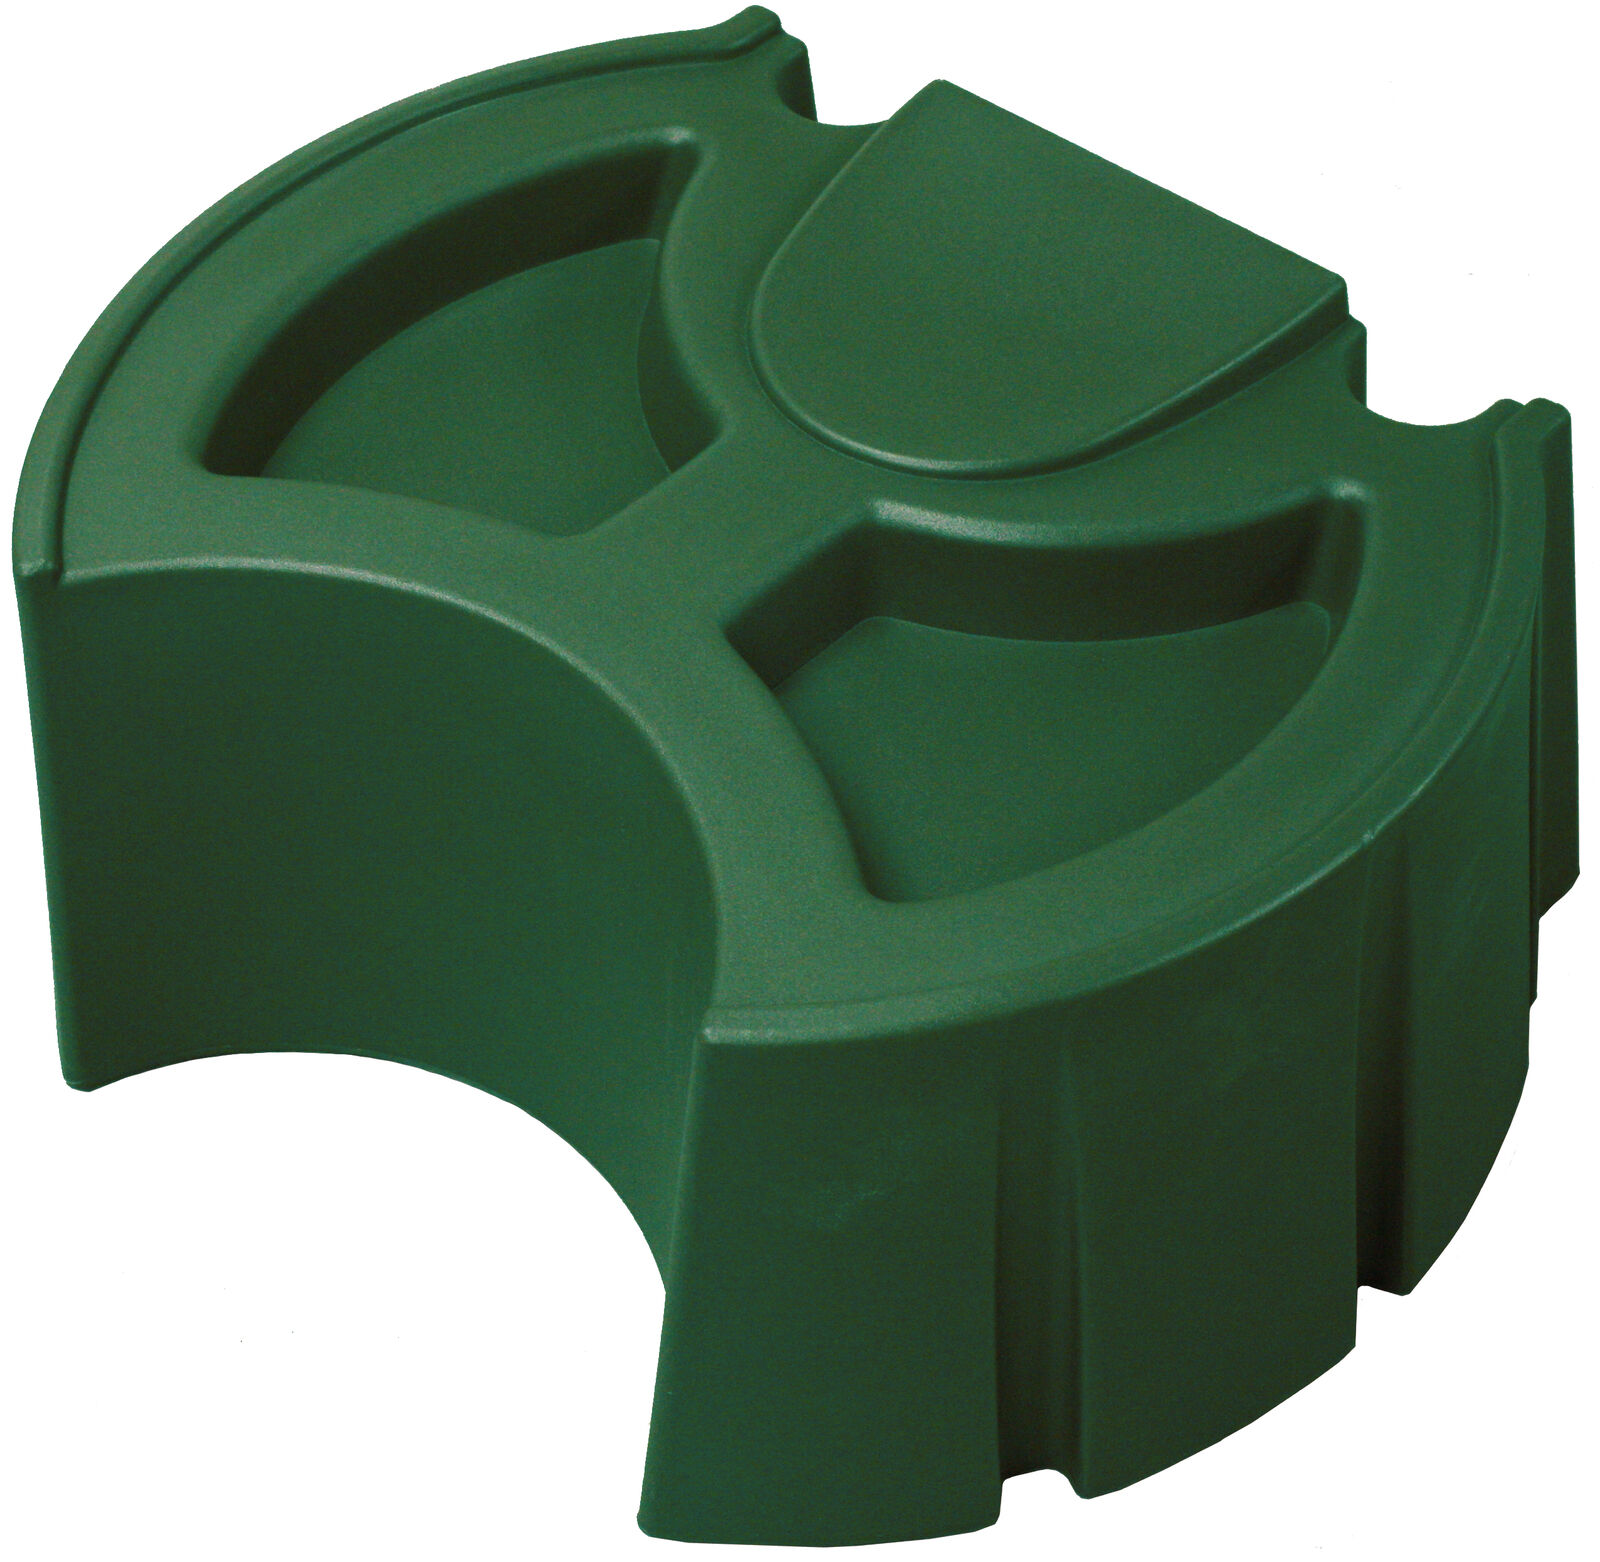 Rain Wizard 50 Stand Increases Pressure And Flow Green 12.5 X 20.5 X 26.5"